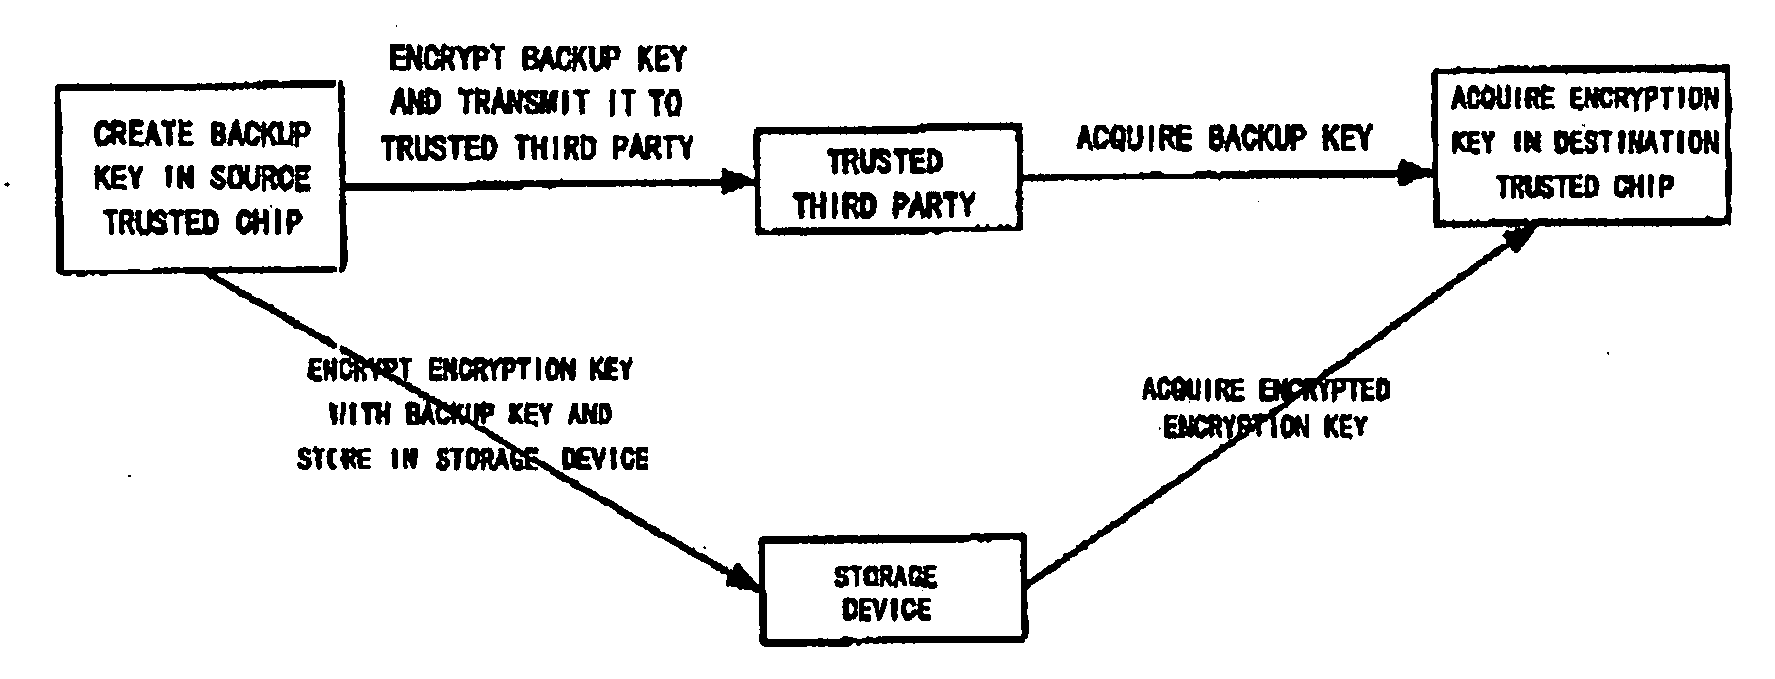 Method for Backing Up and Restoring an Encryption Key